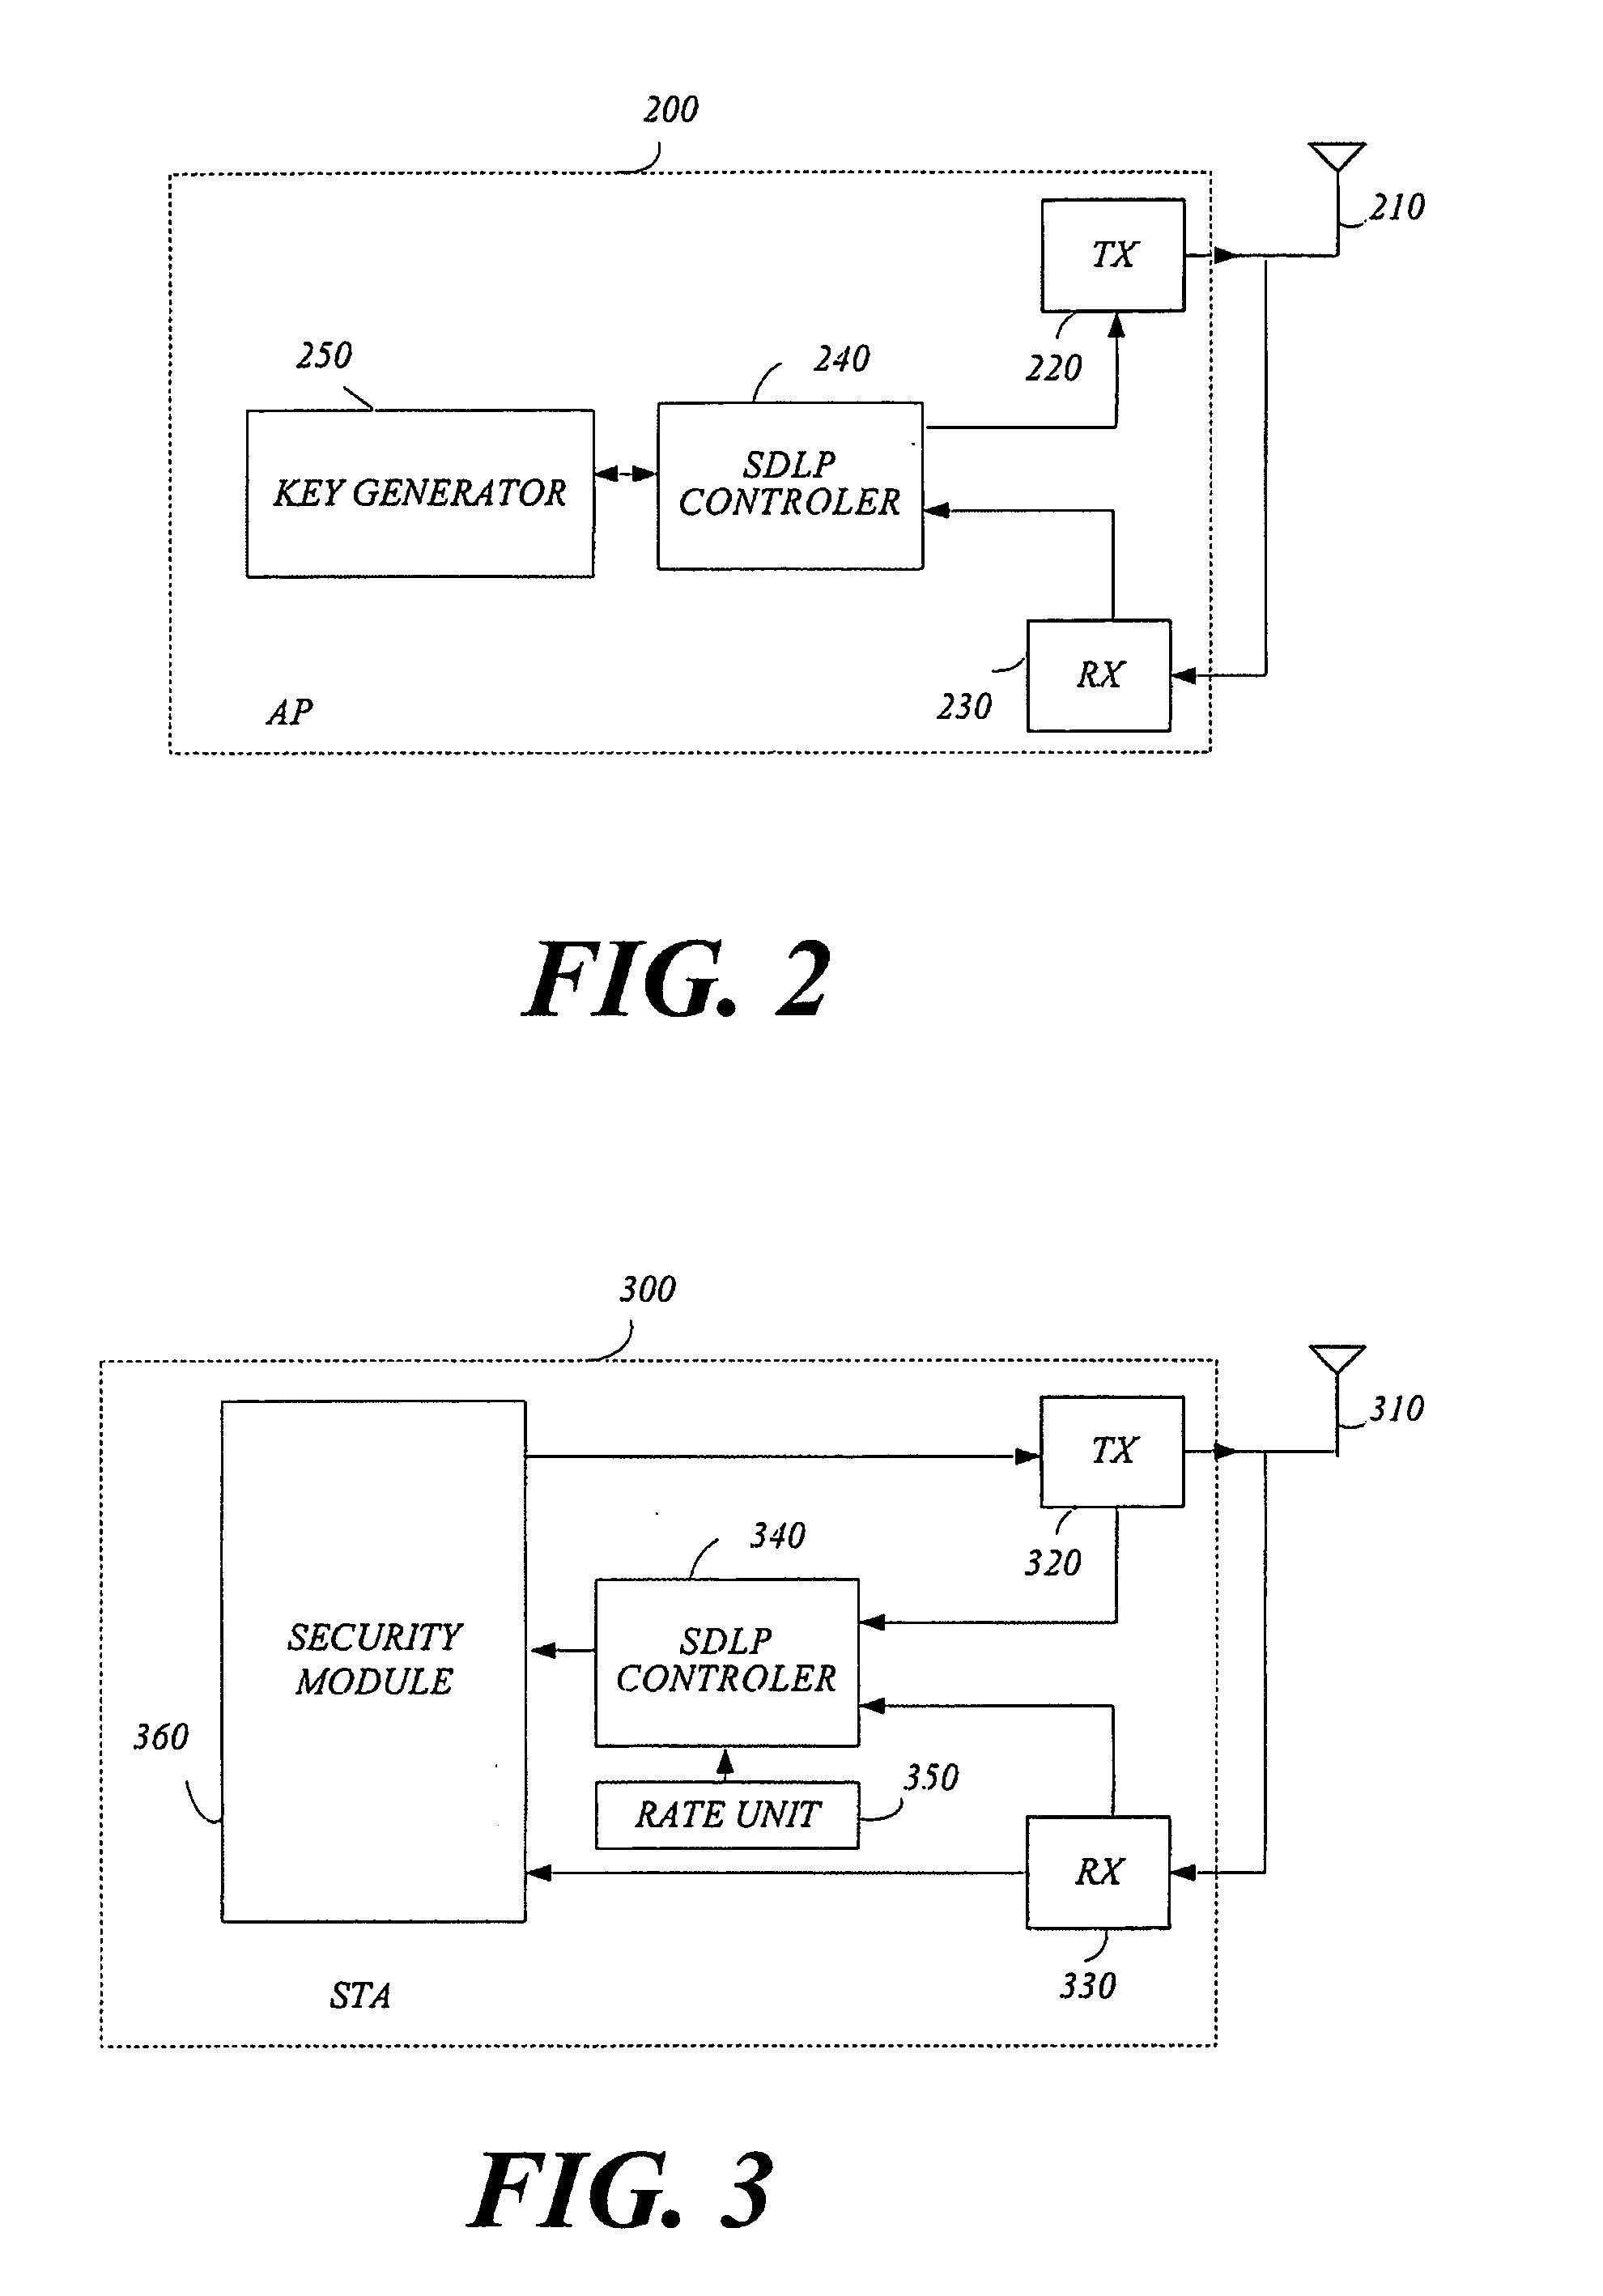 Method and apparatus to provide secured link